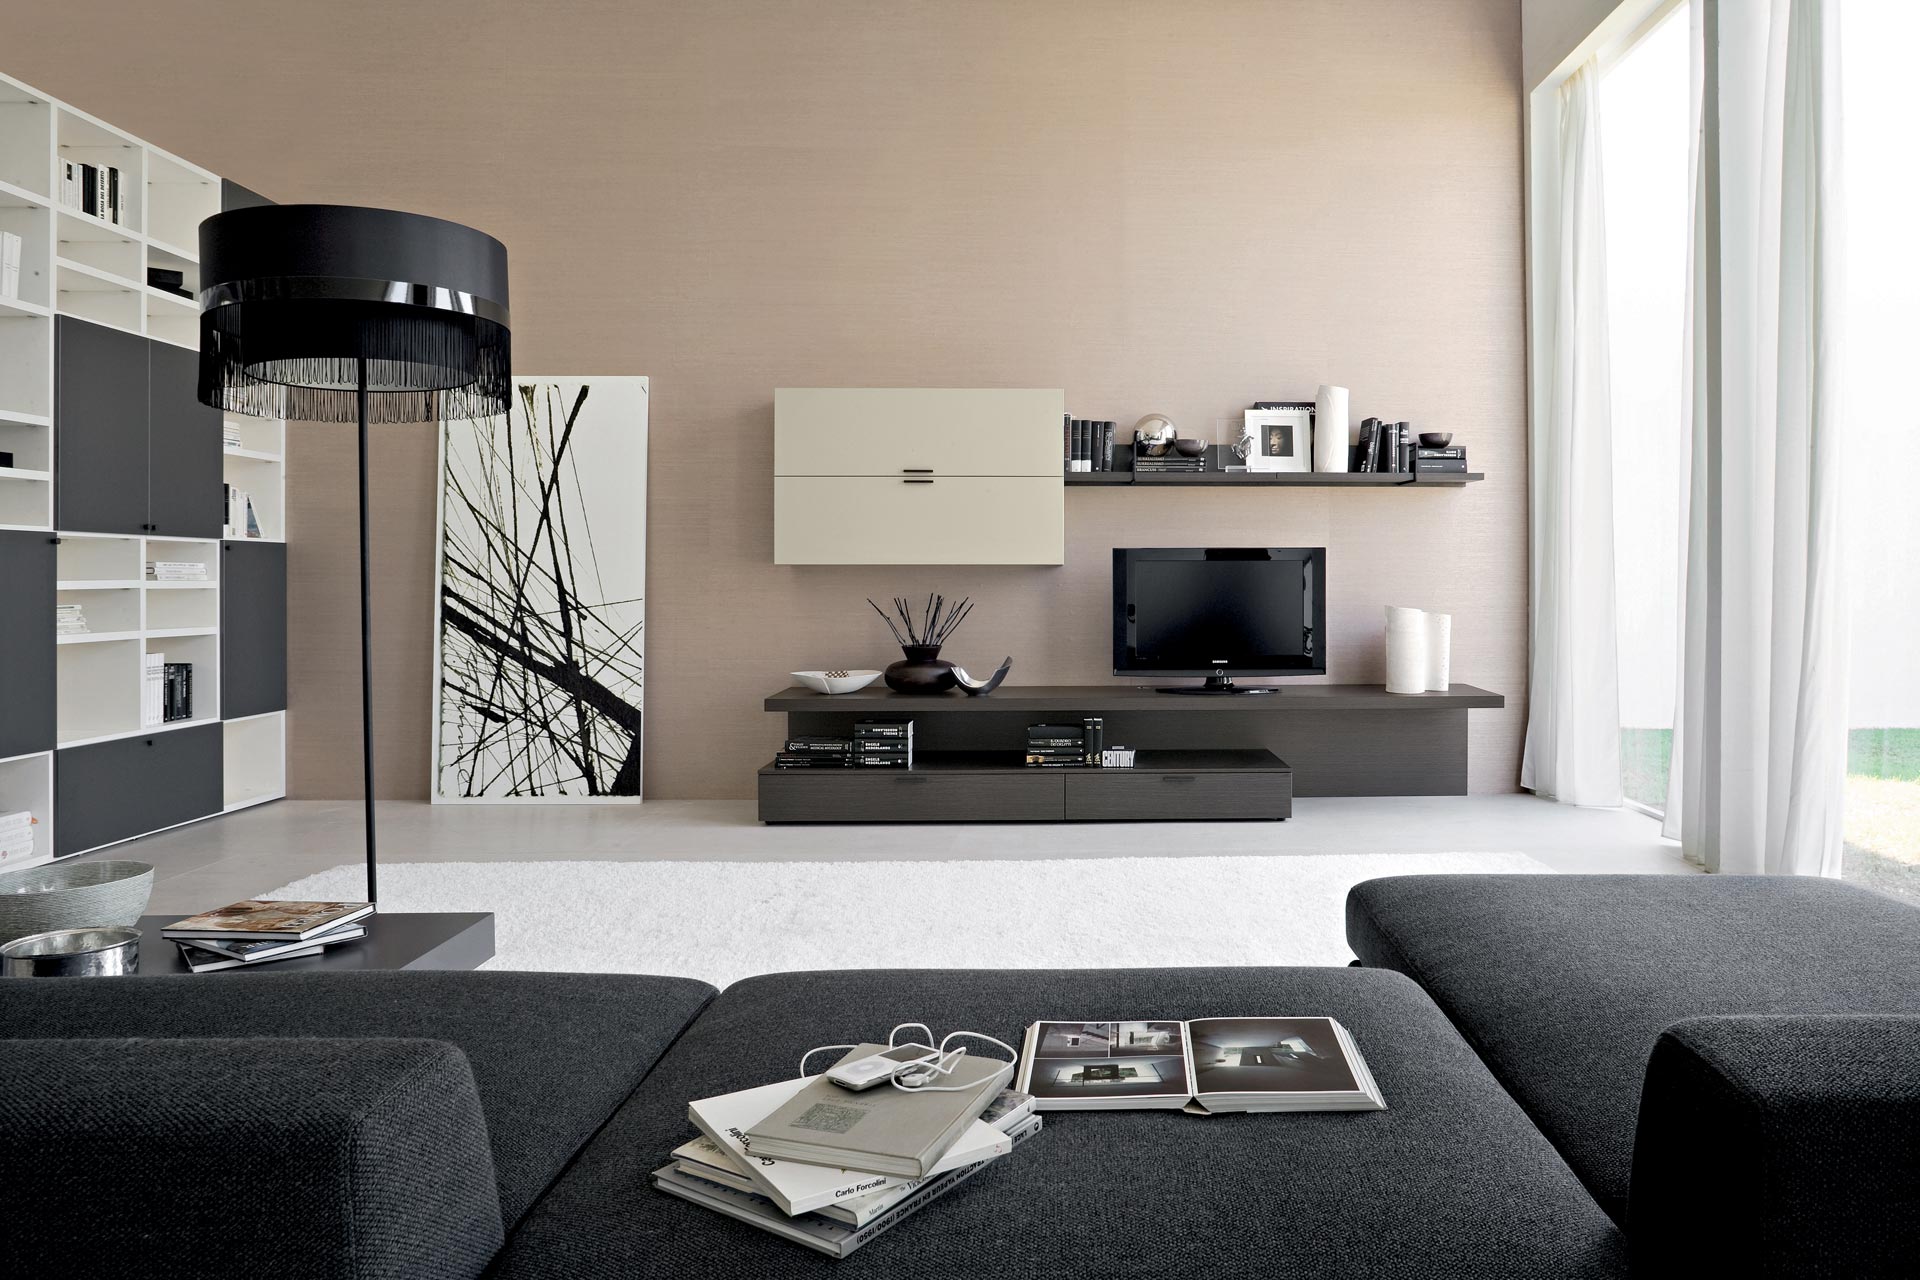 White And In Admirable White And Black Interior In Contemporary Living Room Furnished With Black Sofa And Flooring Stand Lamp On White Soft Rug Living Room Attractive Contemporary Living Room Design